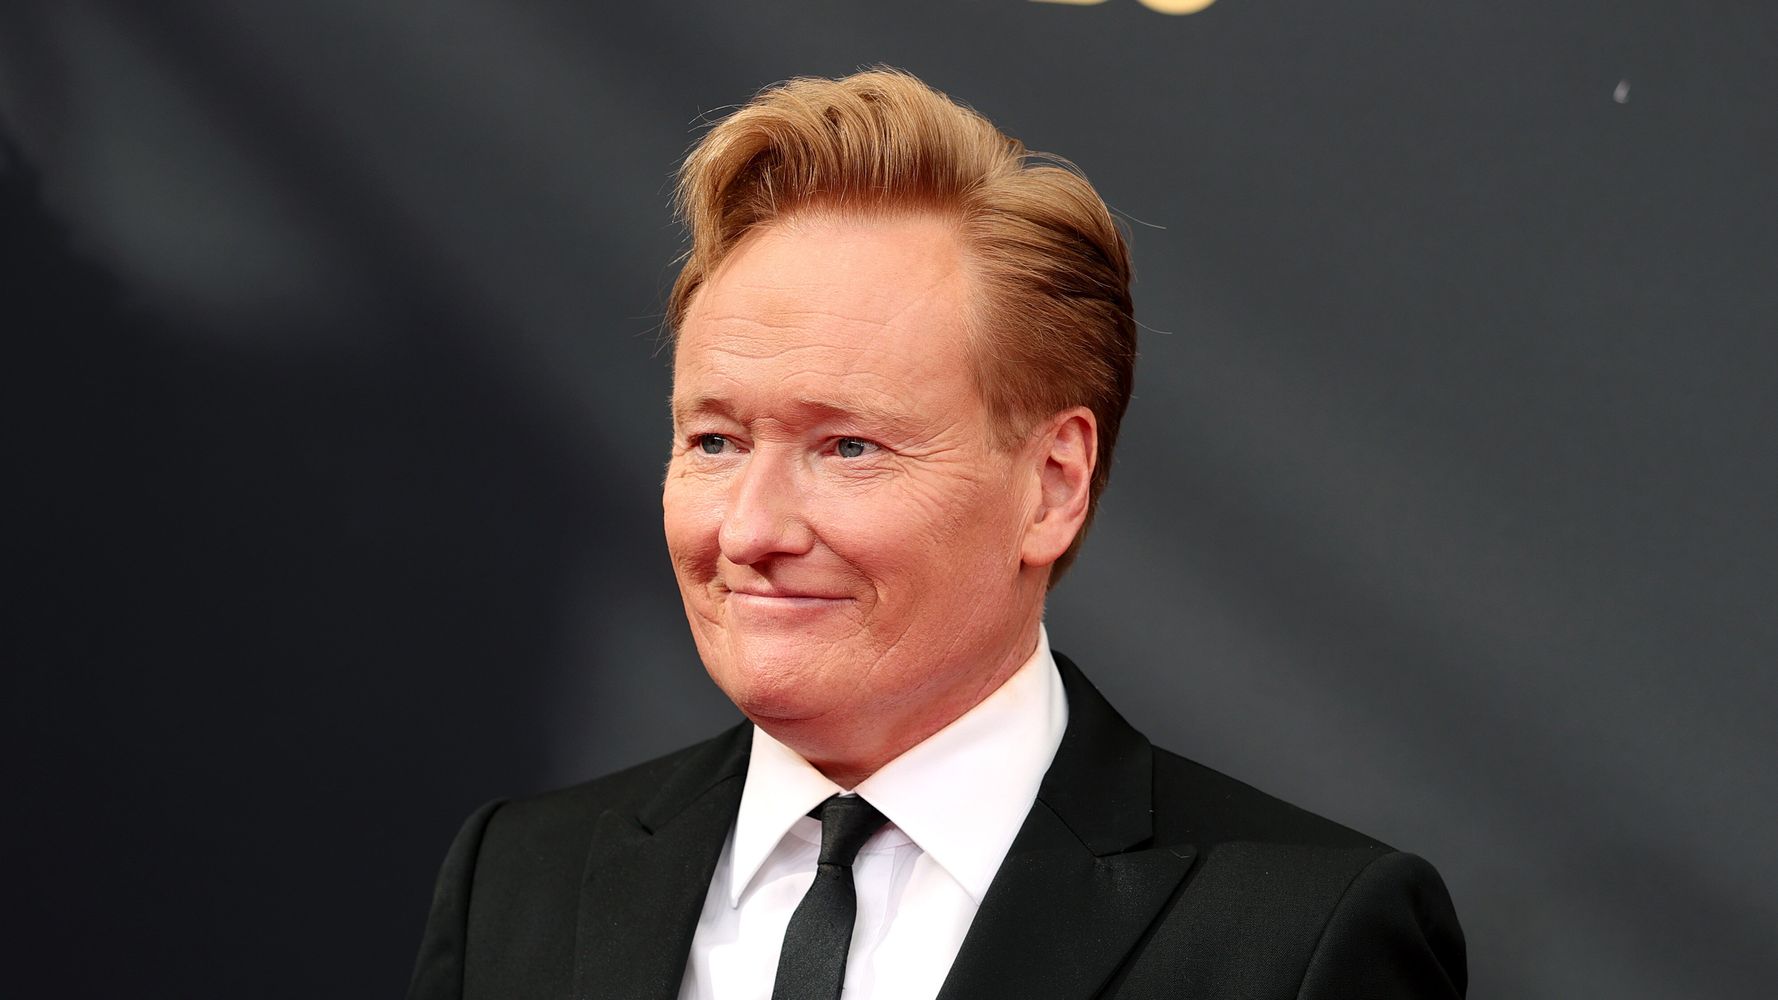 Conan O'Brien Interrupts Emmys With Hilarious Outburst, Sends Twitter Into Tailspin